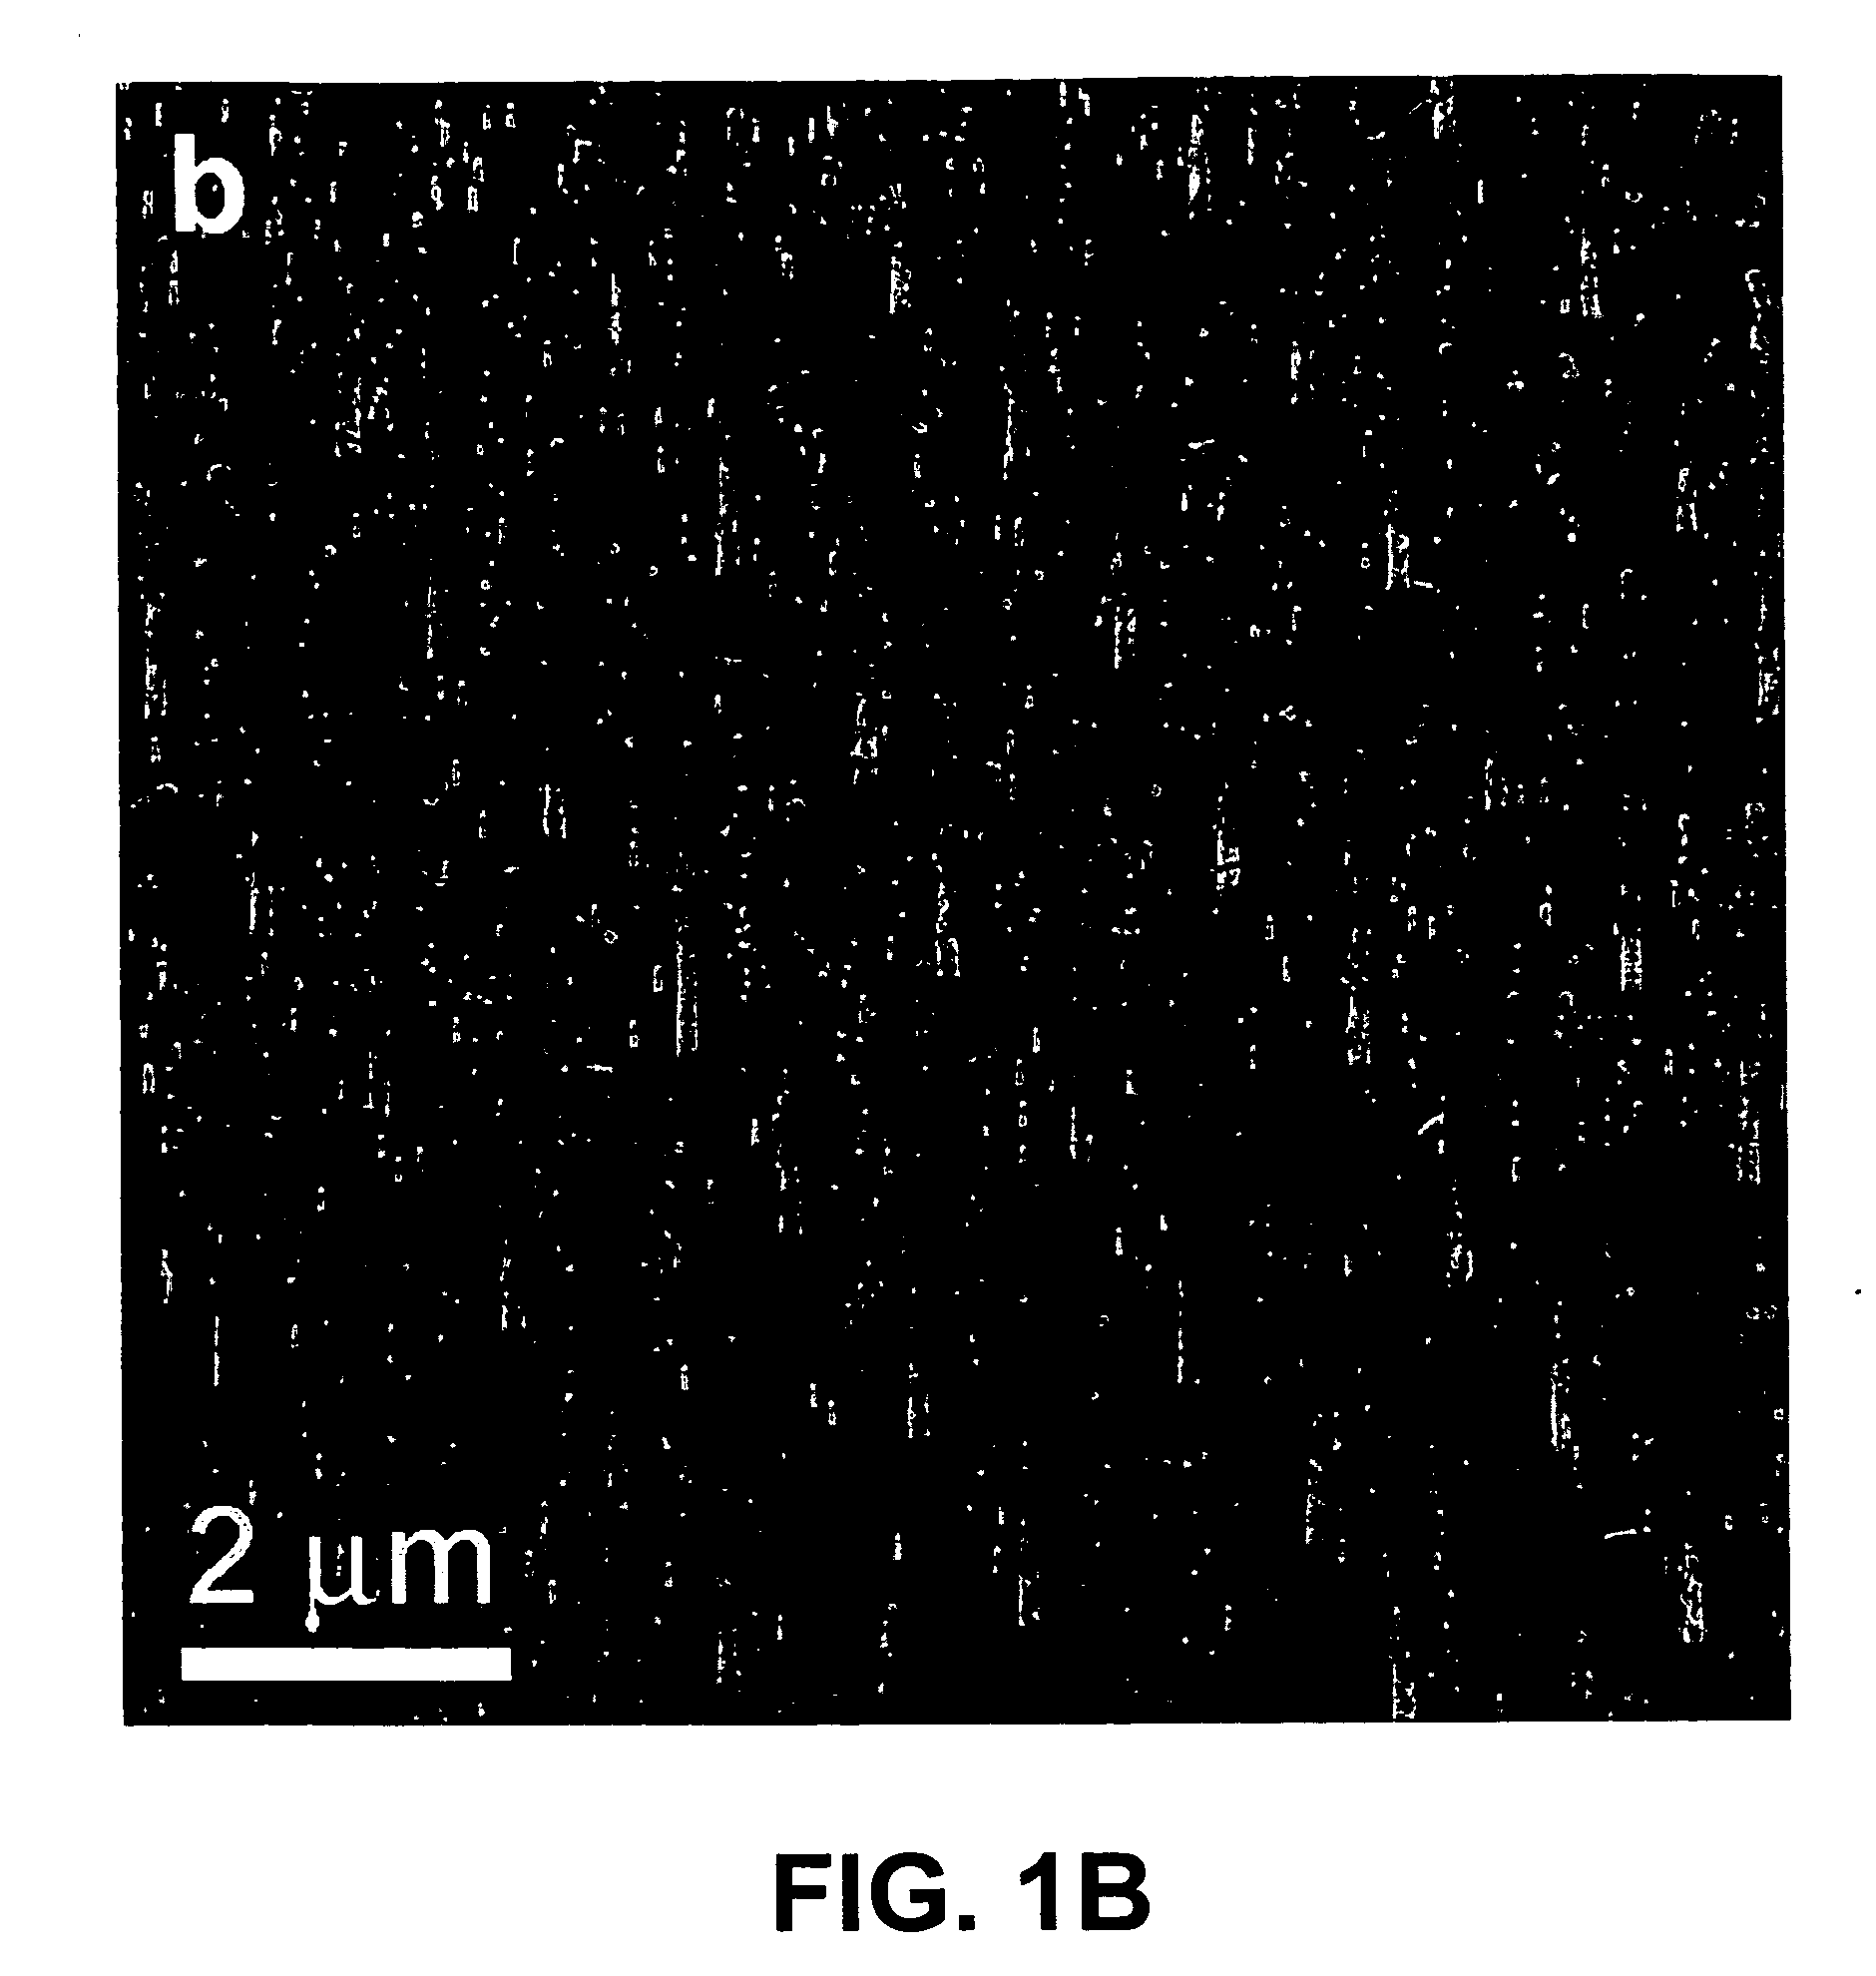 Nanostructures formed of branched nanowhiskers and methods of producing the same